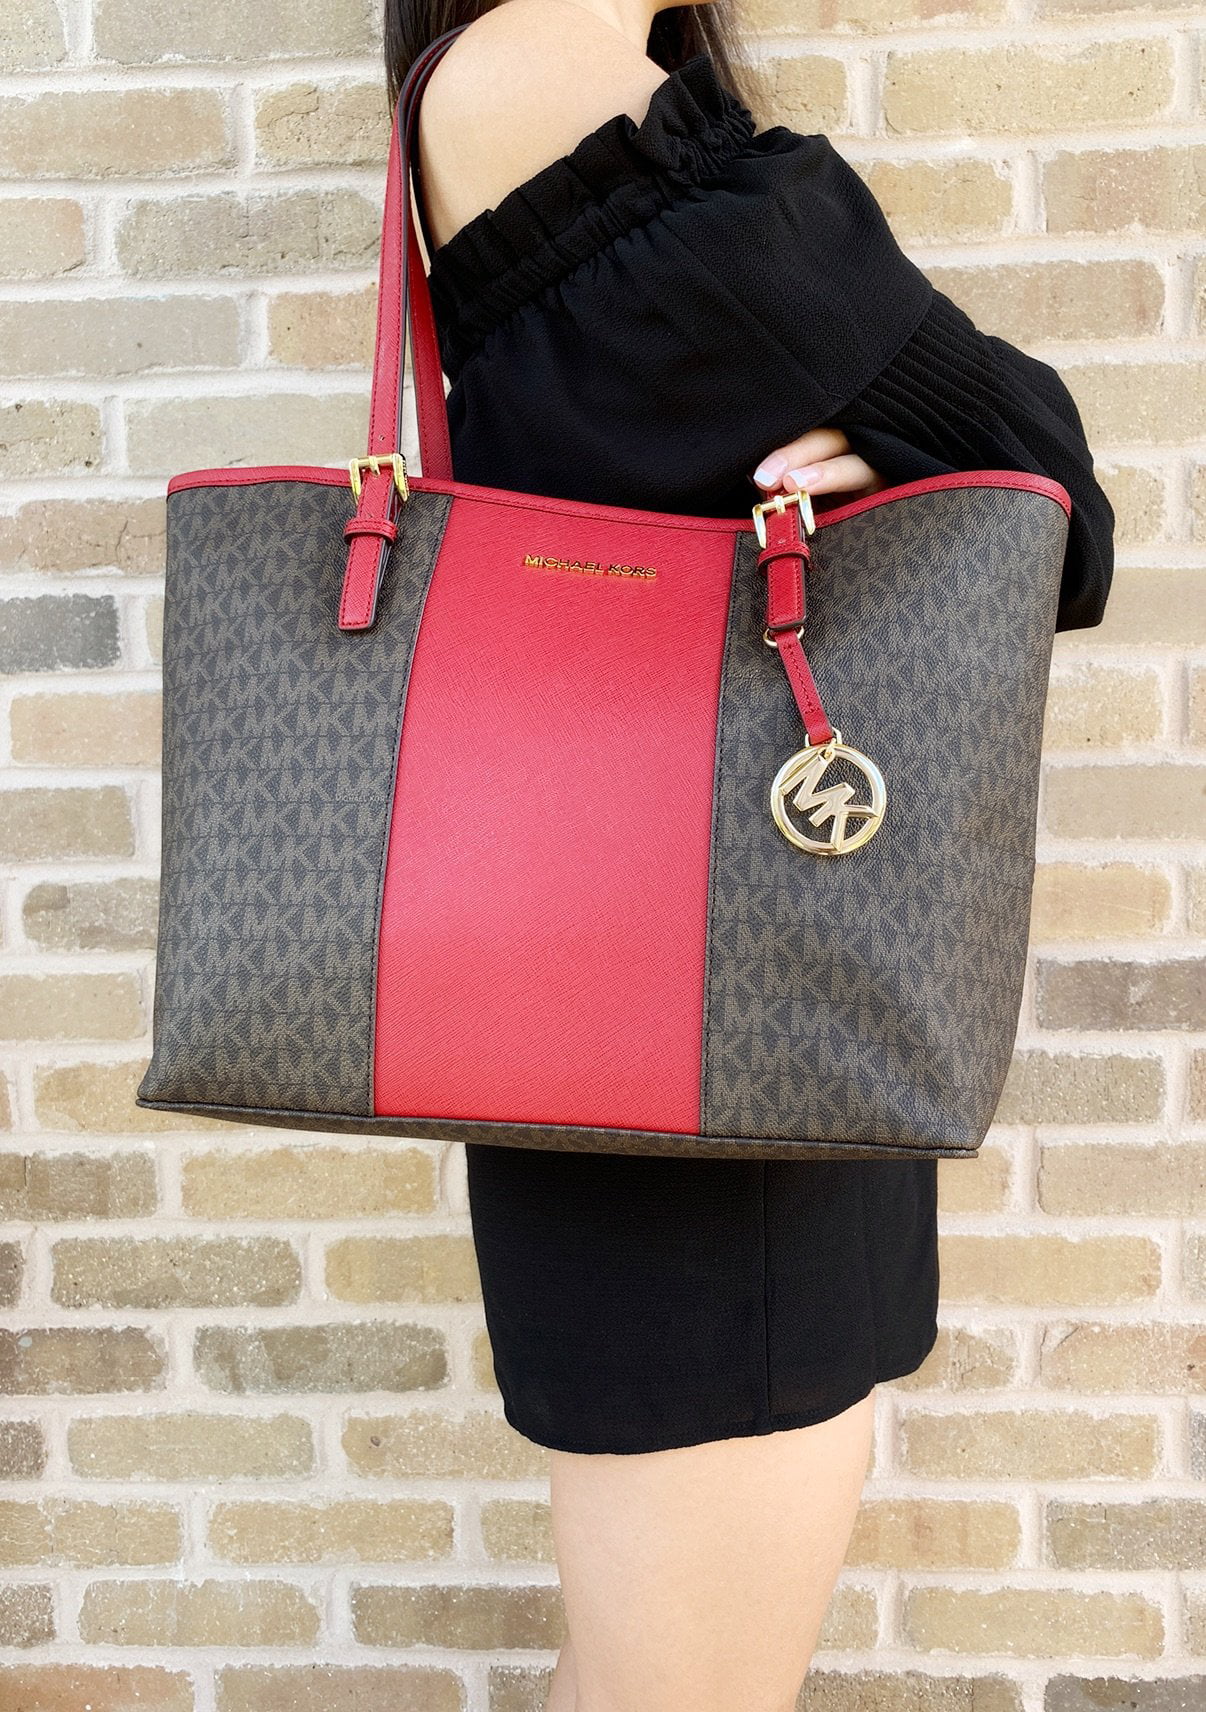 red and black michael kors purse